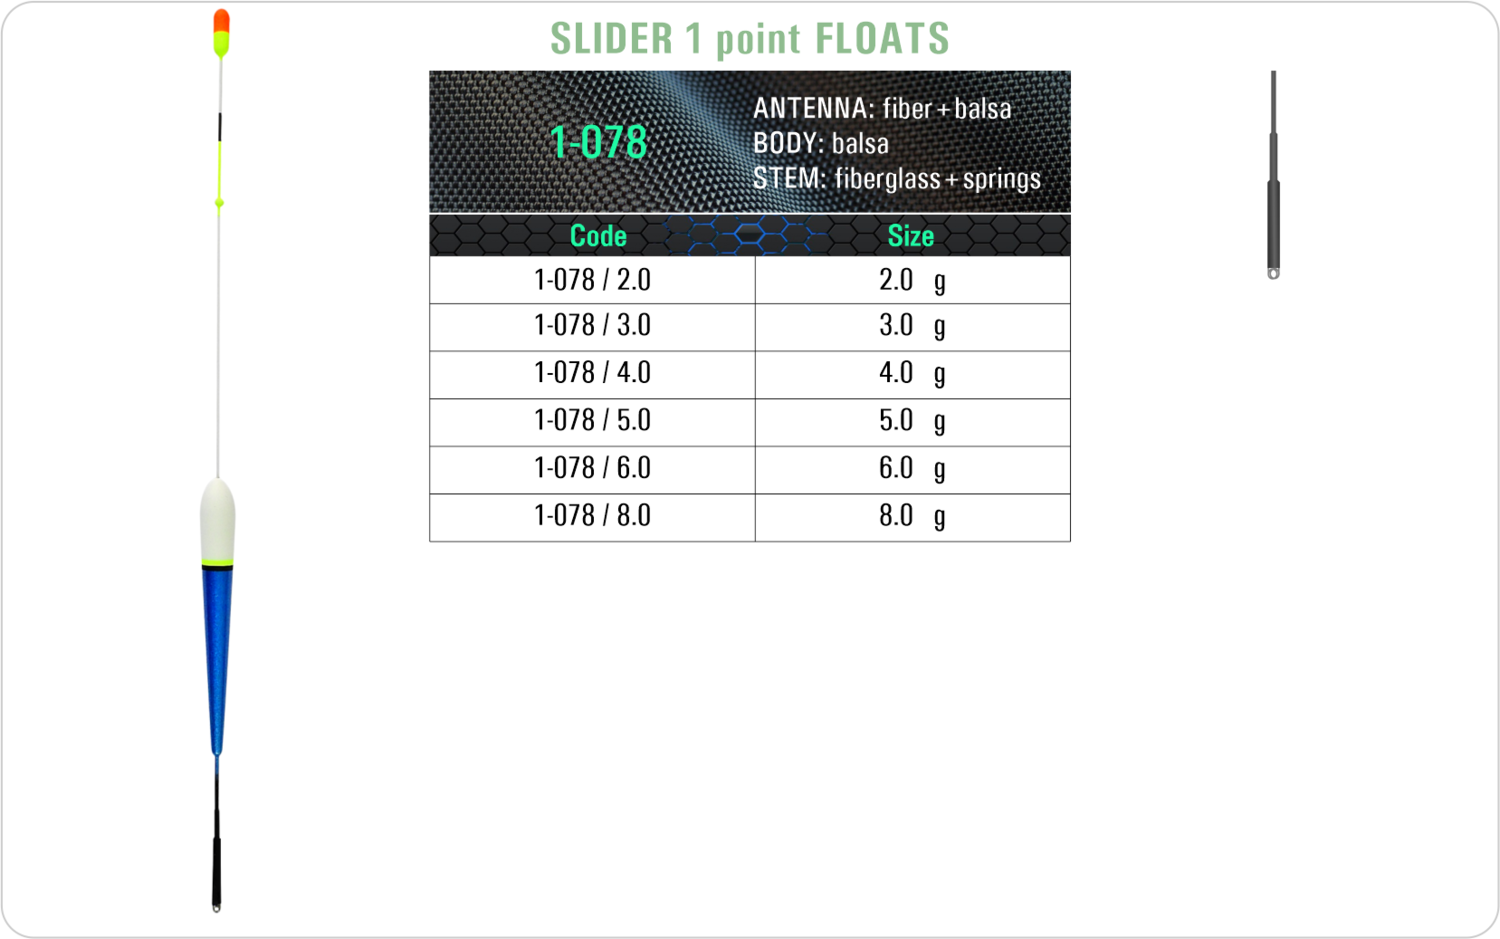 SF 1-078 - Lake and river float model and table containing an additional information about this float with different codes, sizes, types of the body, the stem and the antenna of the float.